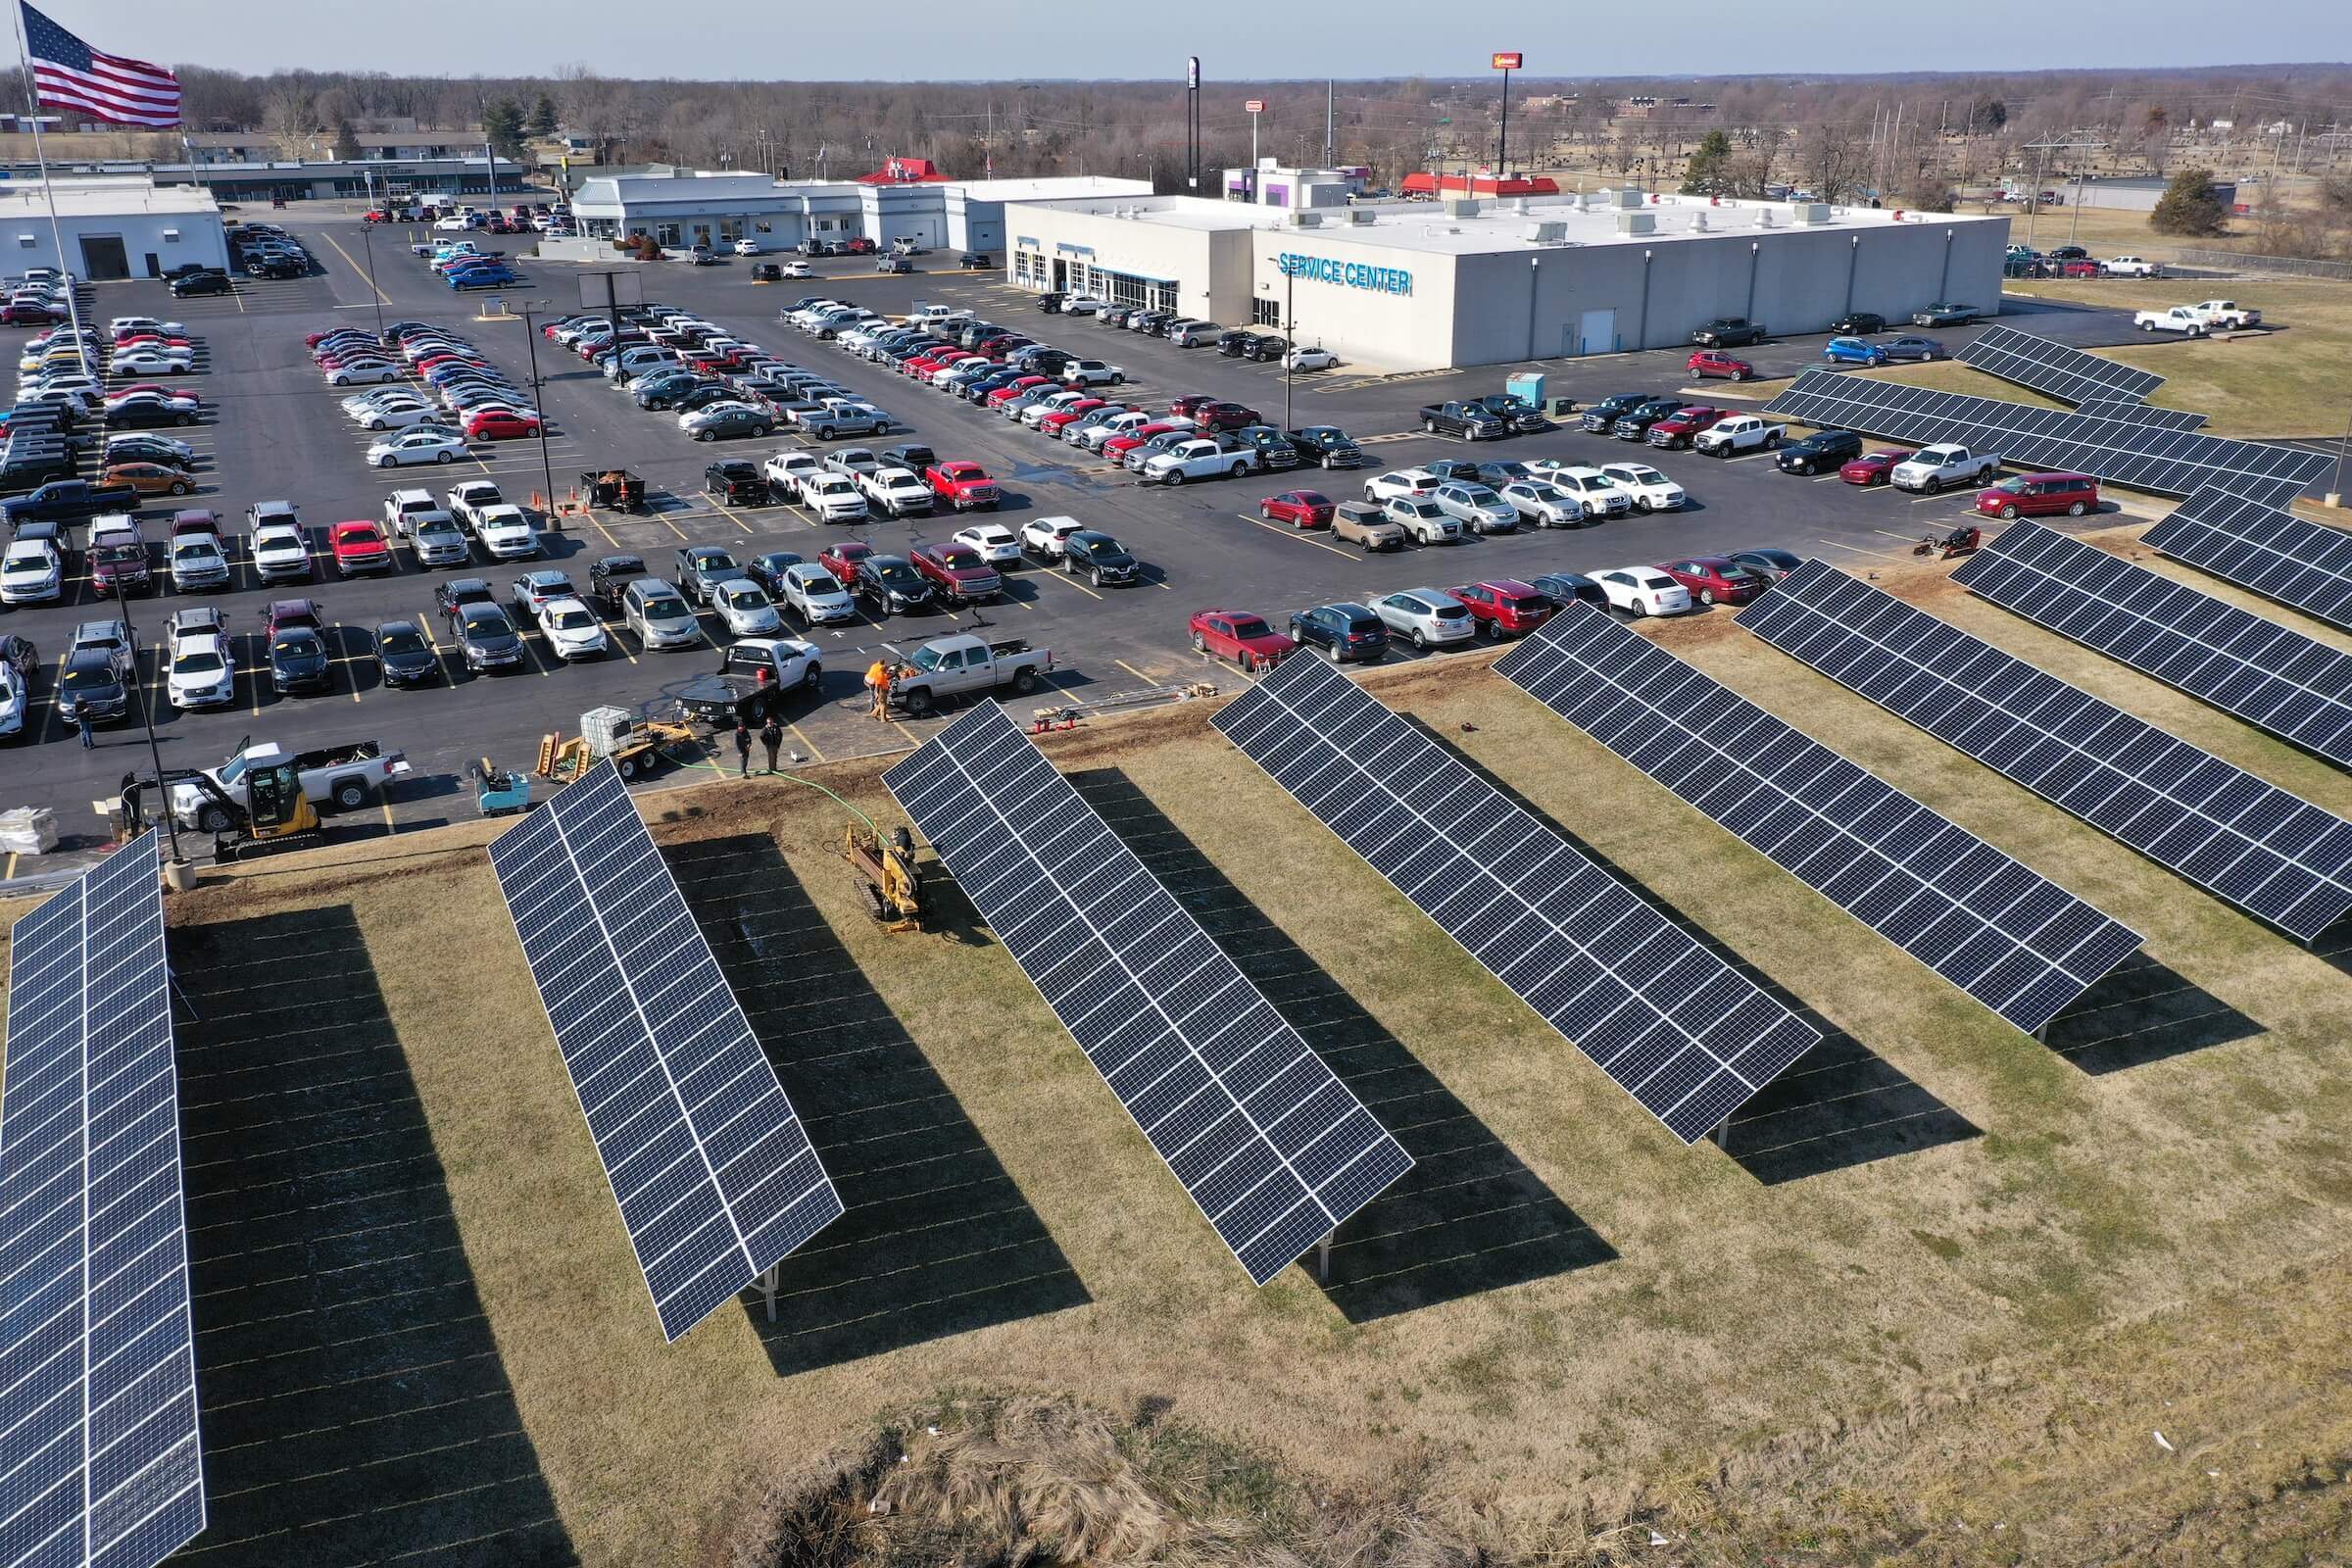 ground-mounted solar panel systems on a lawn next to parking lot